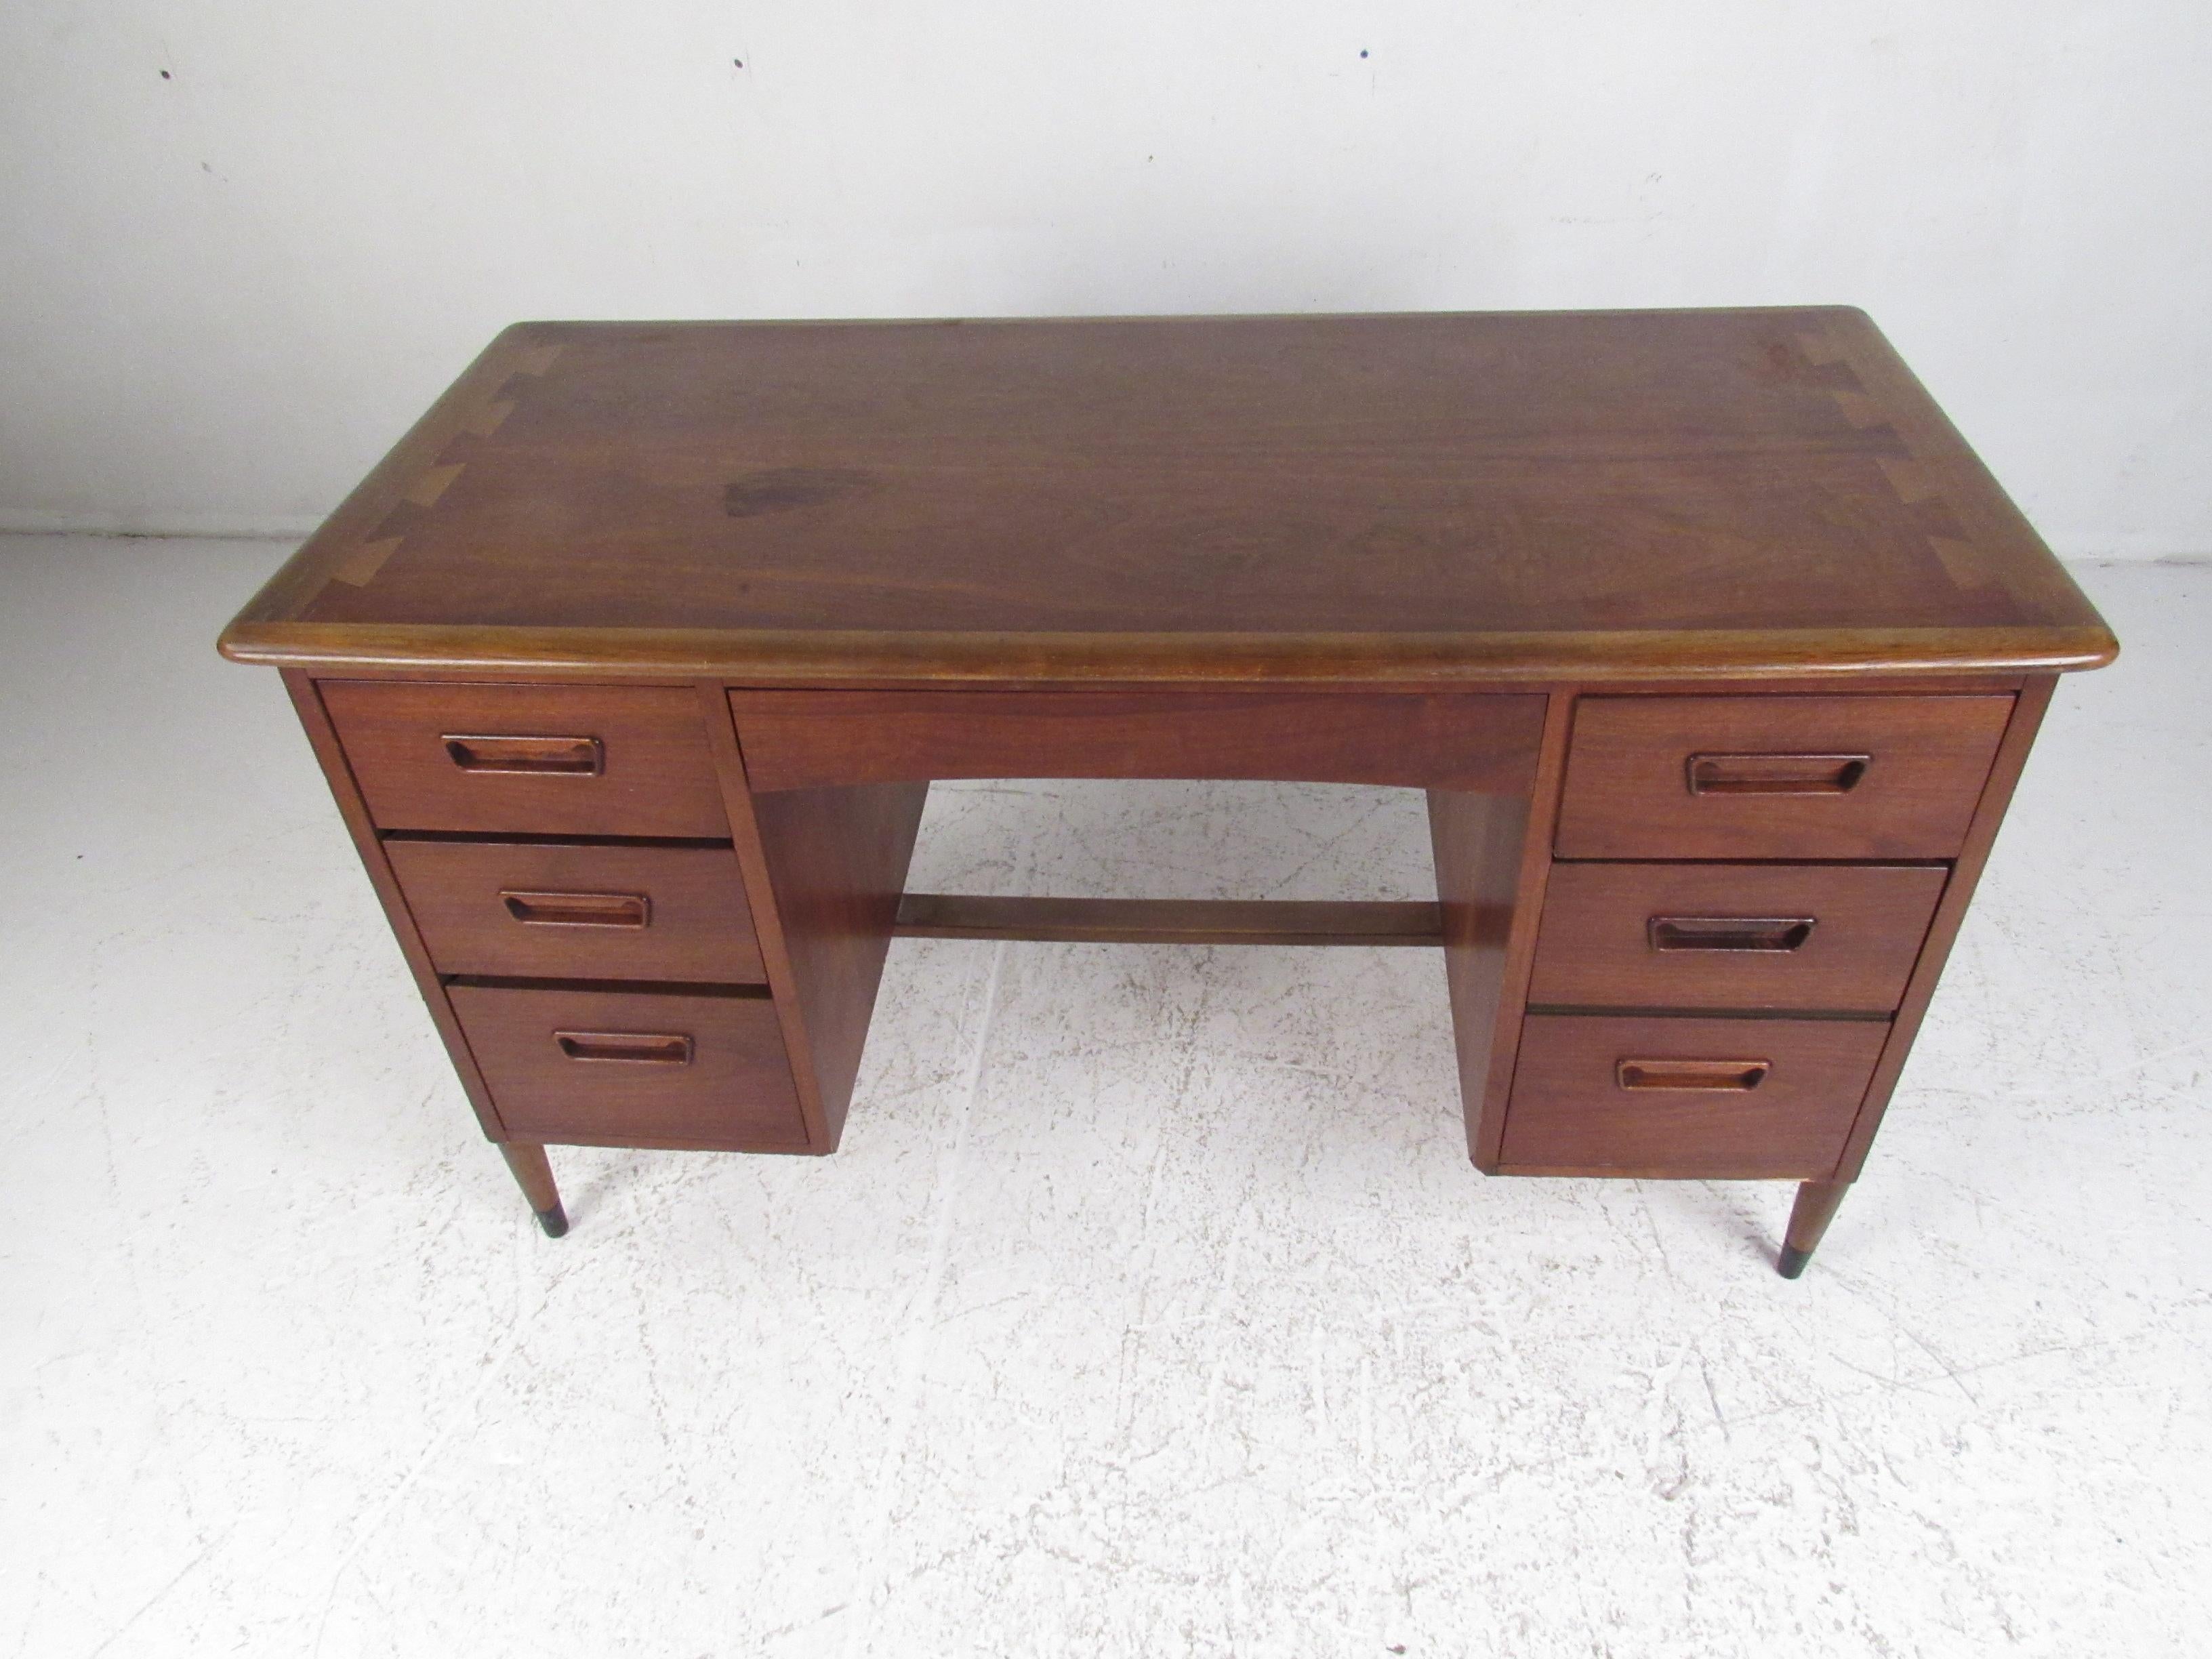 A stunning vintage modern double pedestal desk with six hefty drawers. This stylish two-tone case piece boasts a walnut casing with dovetailed oak inlays around the top. A sleek design with elegant walnut wood grain throughout and tapered legs with